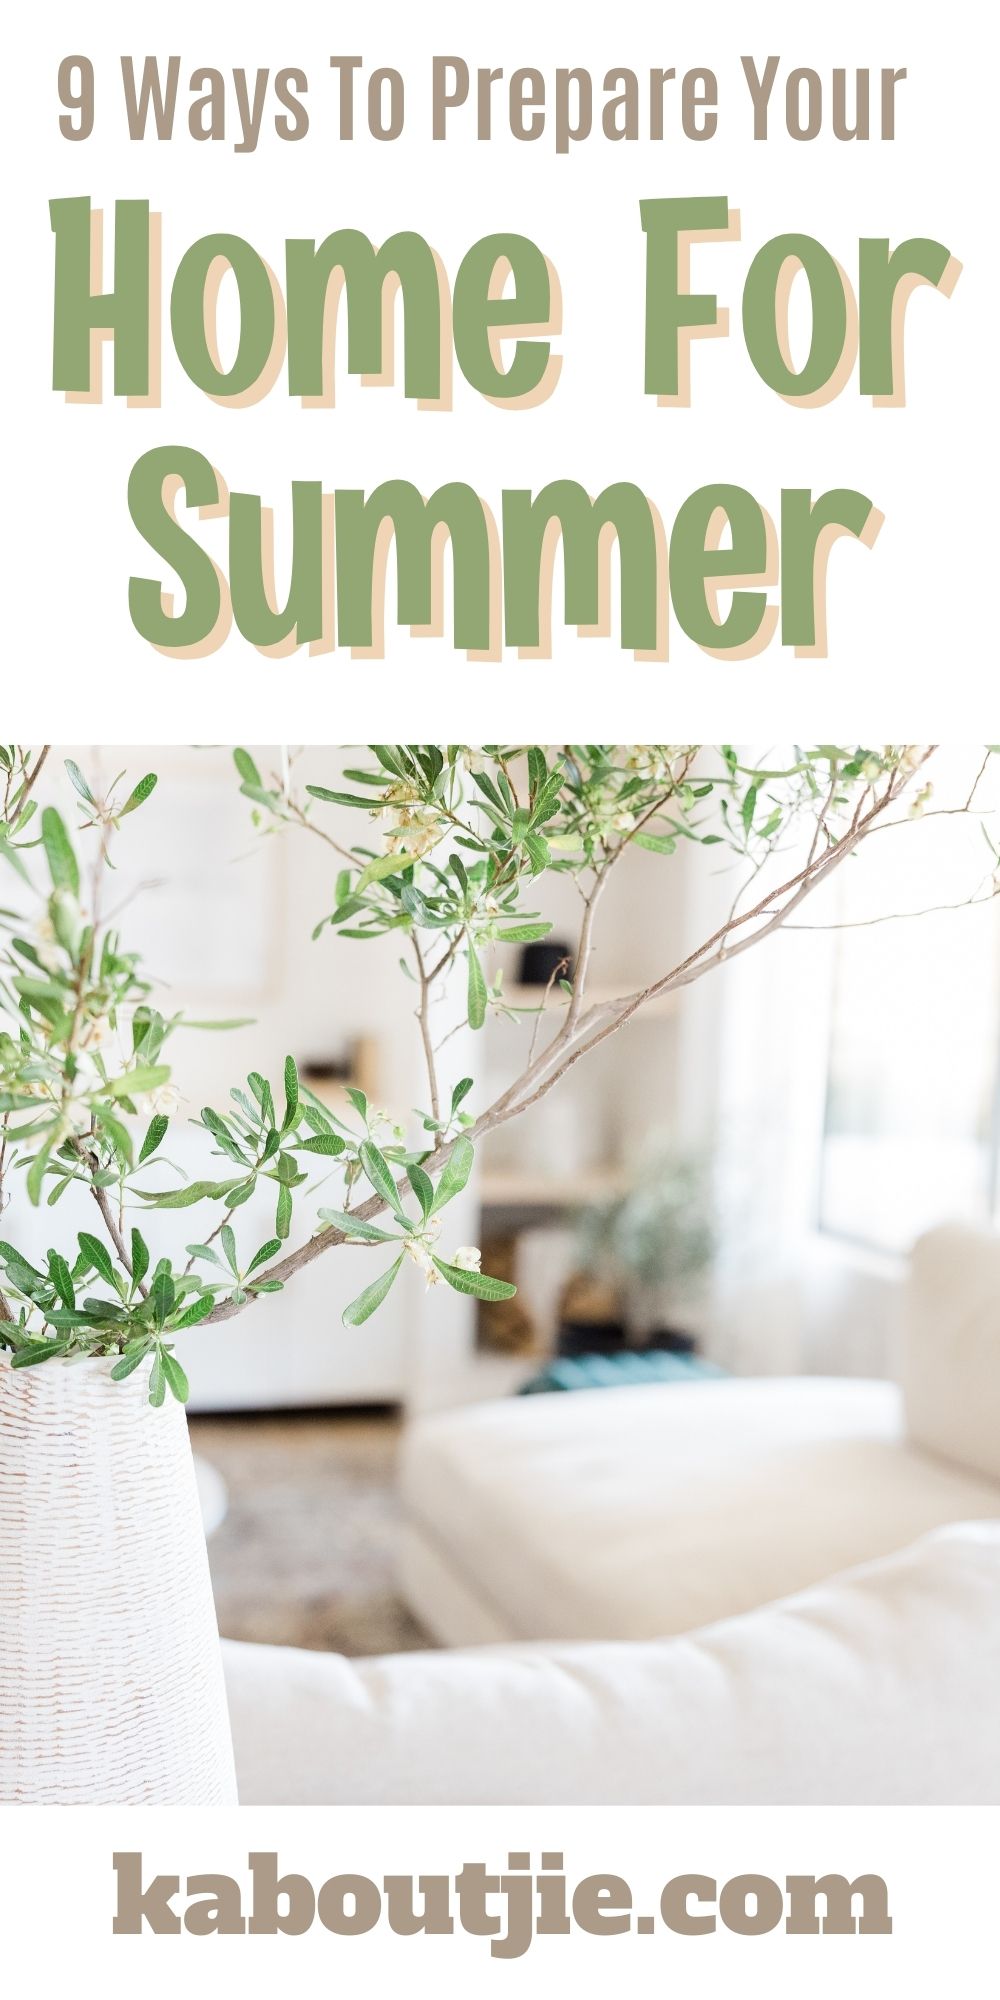 9 Ways To Prepare Your Home For Summer